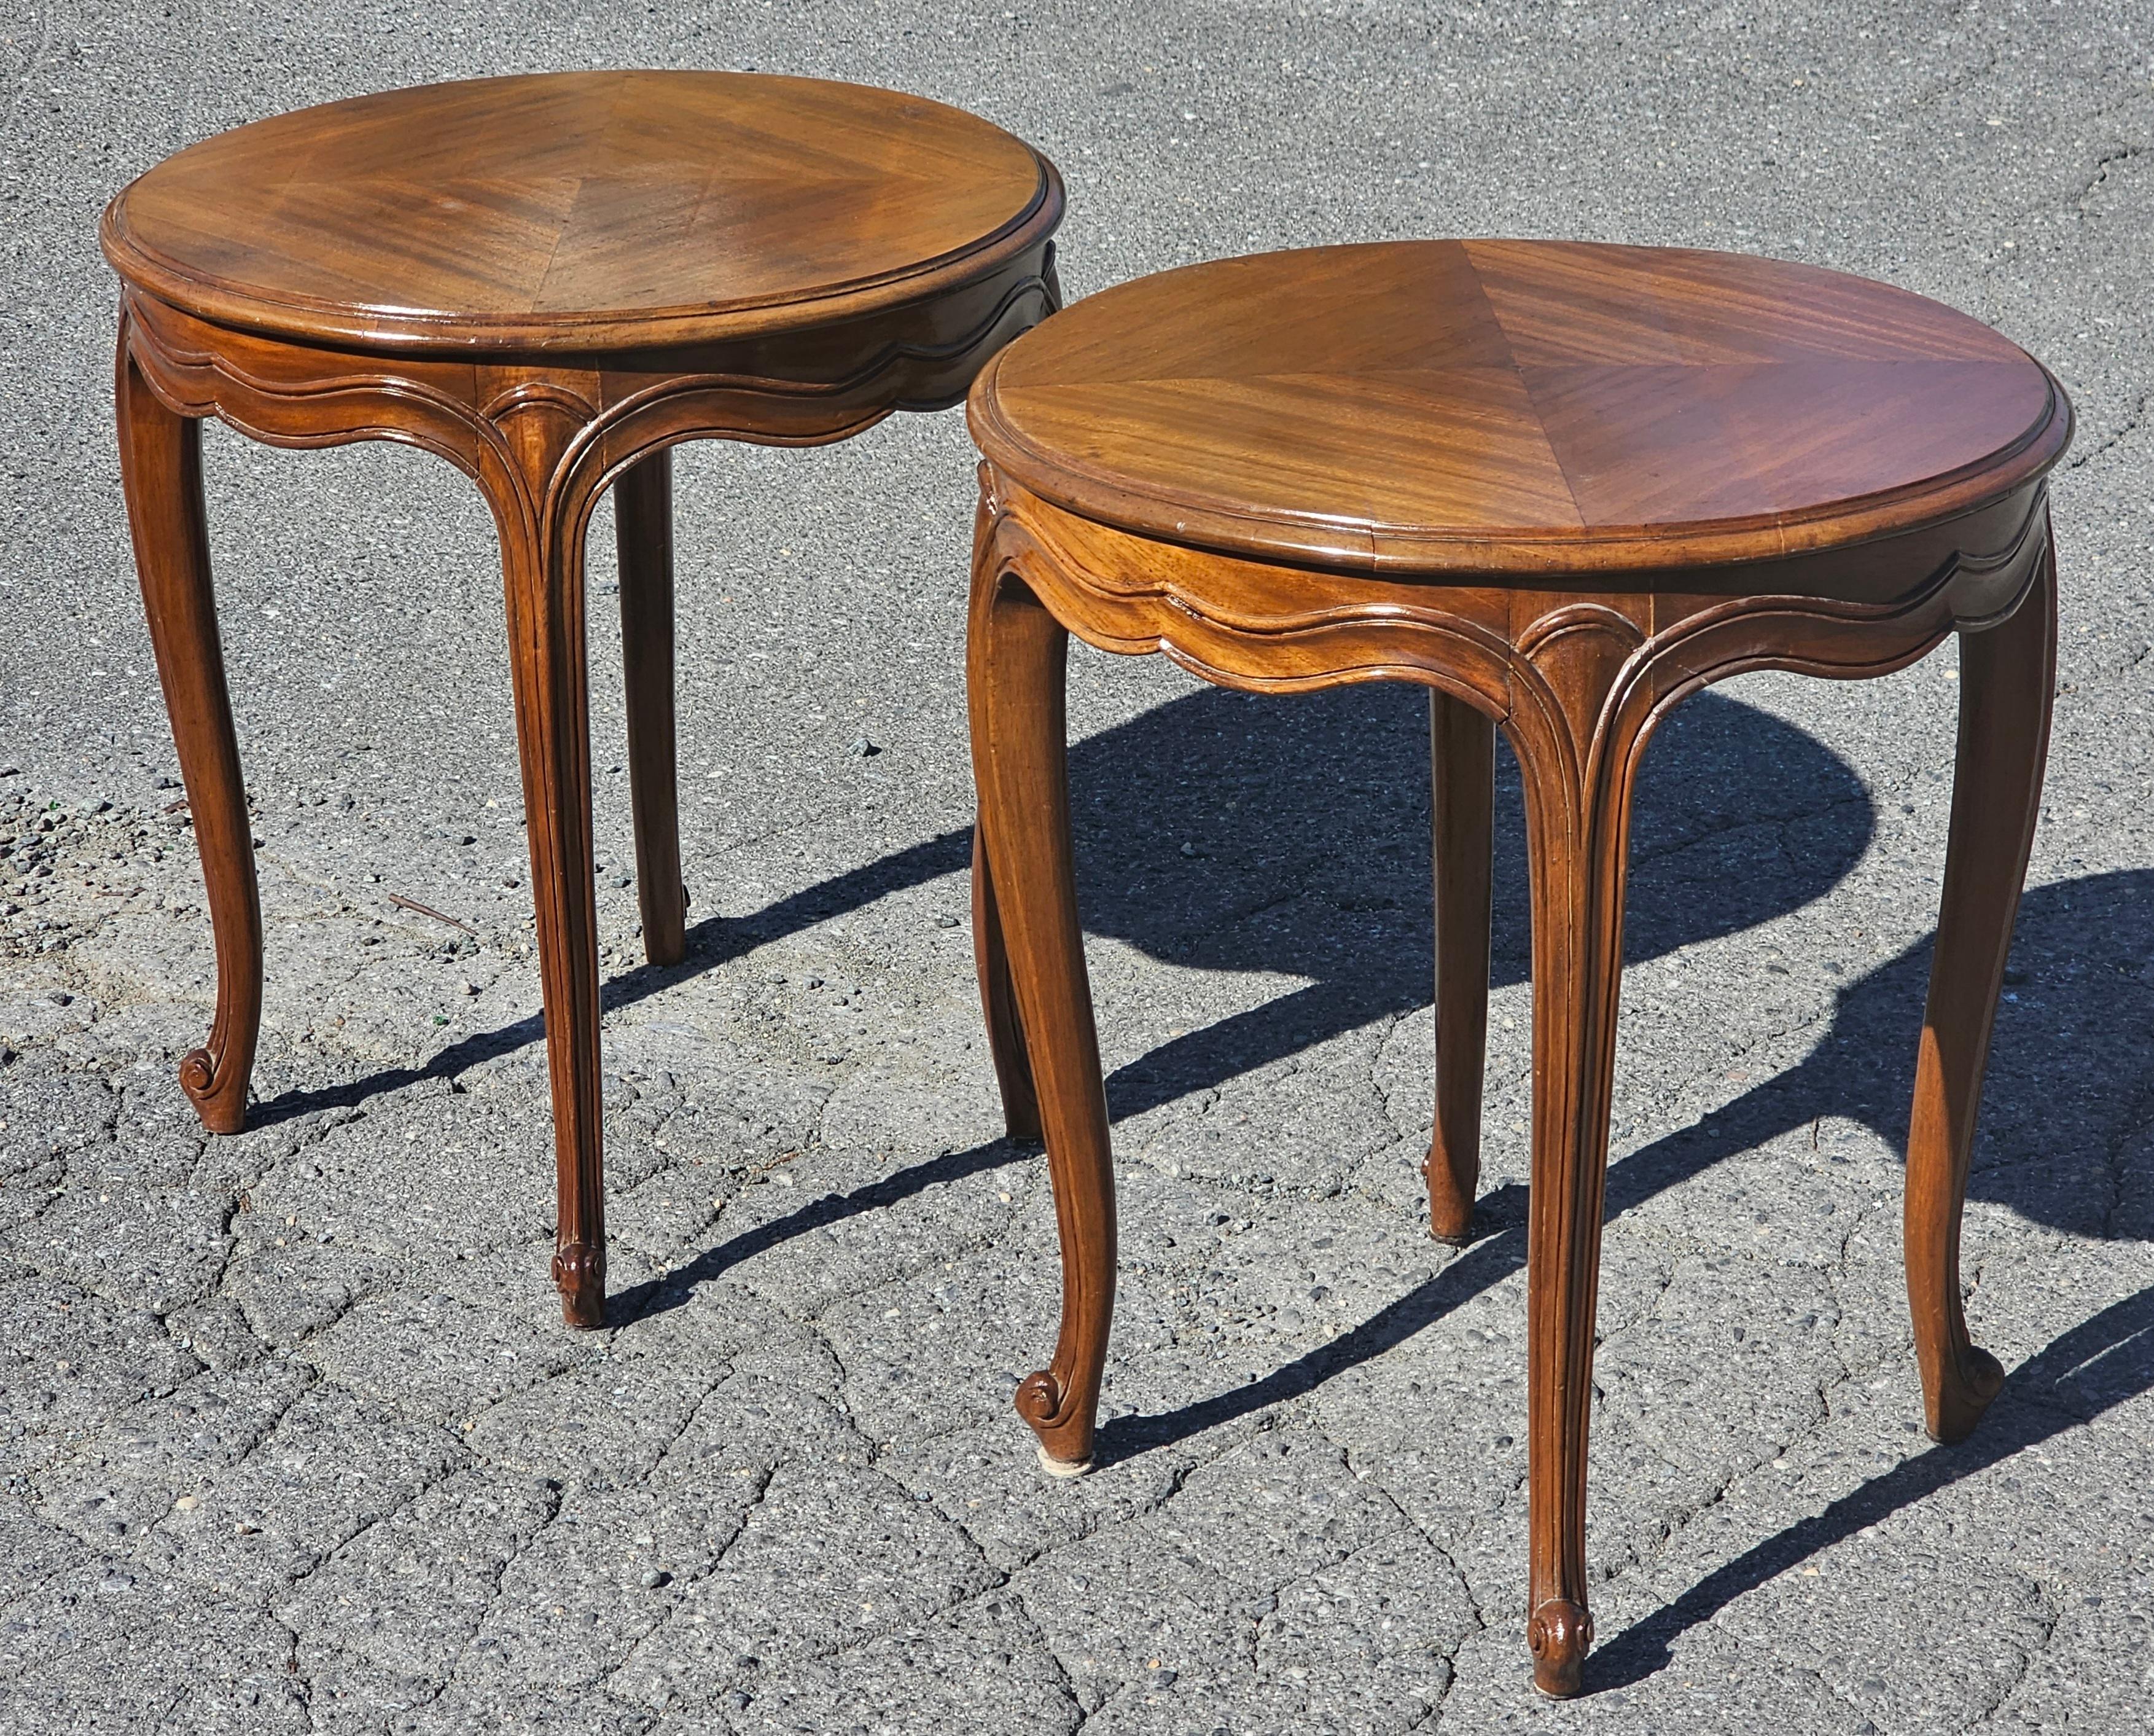 Gorgeous pair of 1950s Habana Gallery Cuban Mahogany Gueridon Tables in Frwnch Provincial style. Measure 22